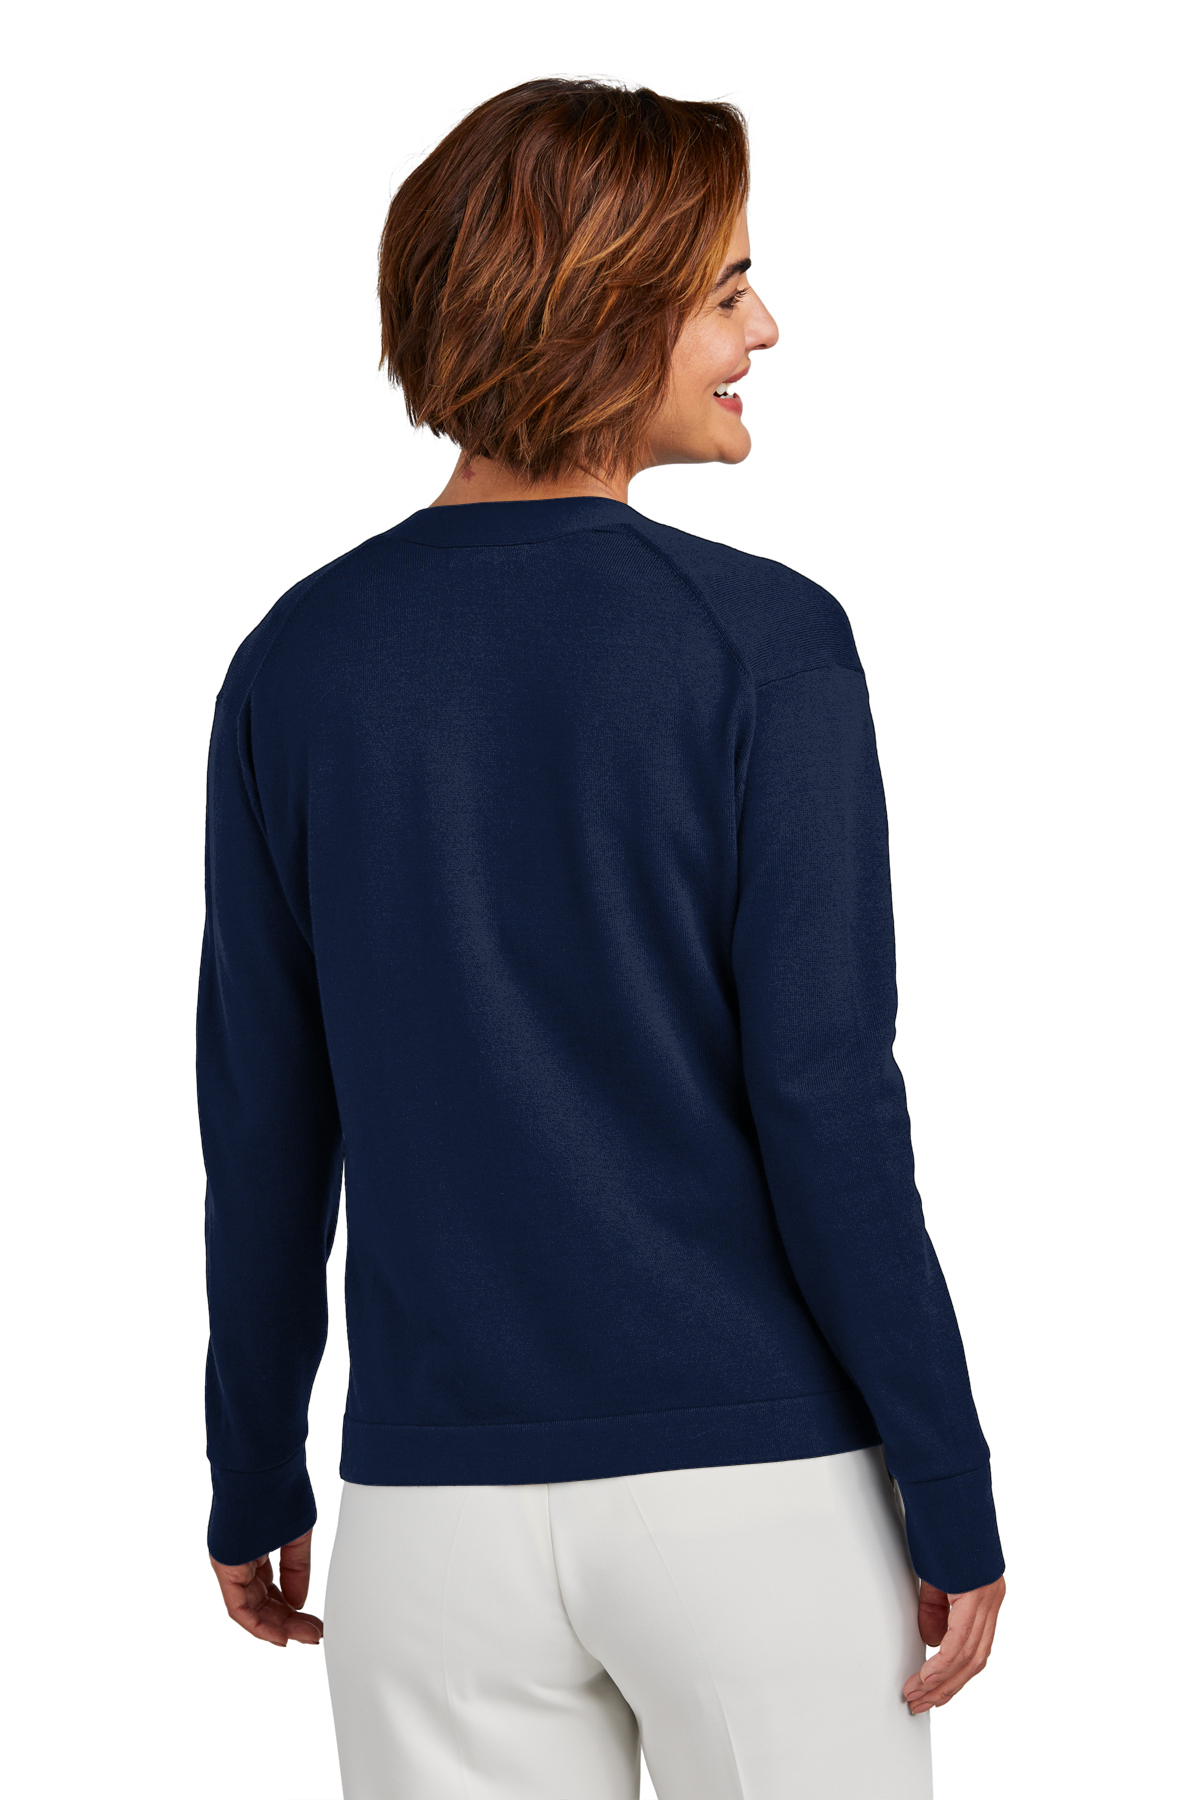 Brooks Brothers Women\'s Cotton Stretch Cardigan Sweater | Product | SanMar